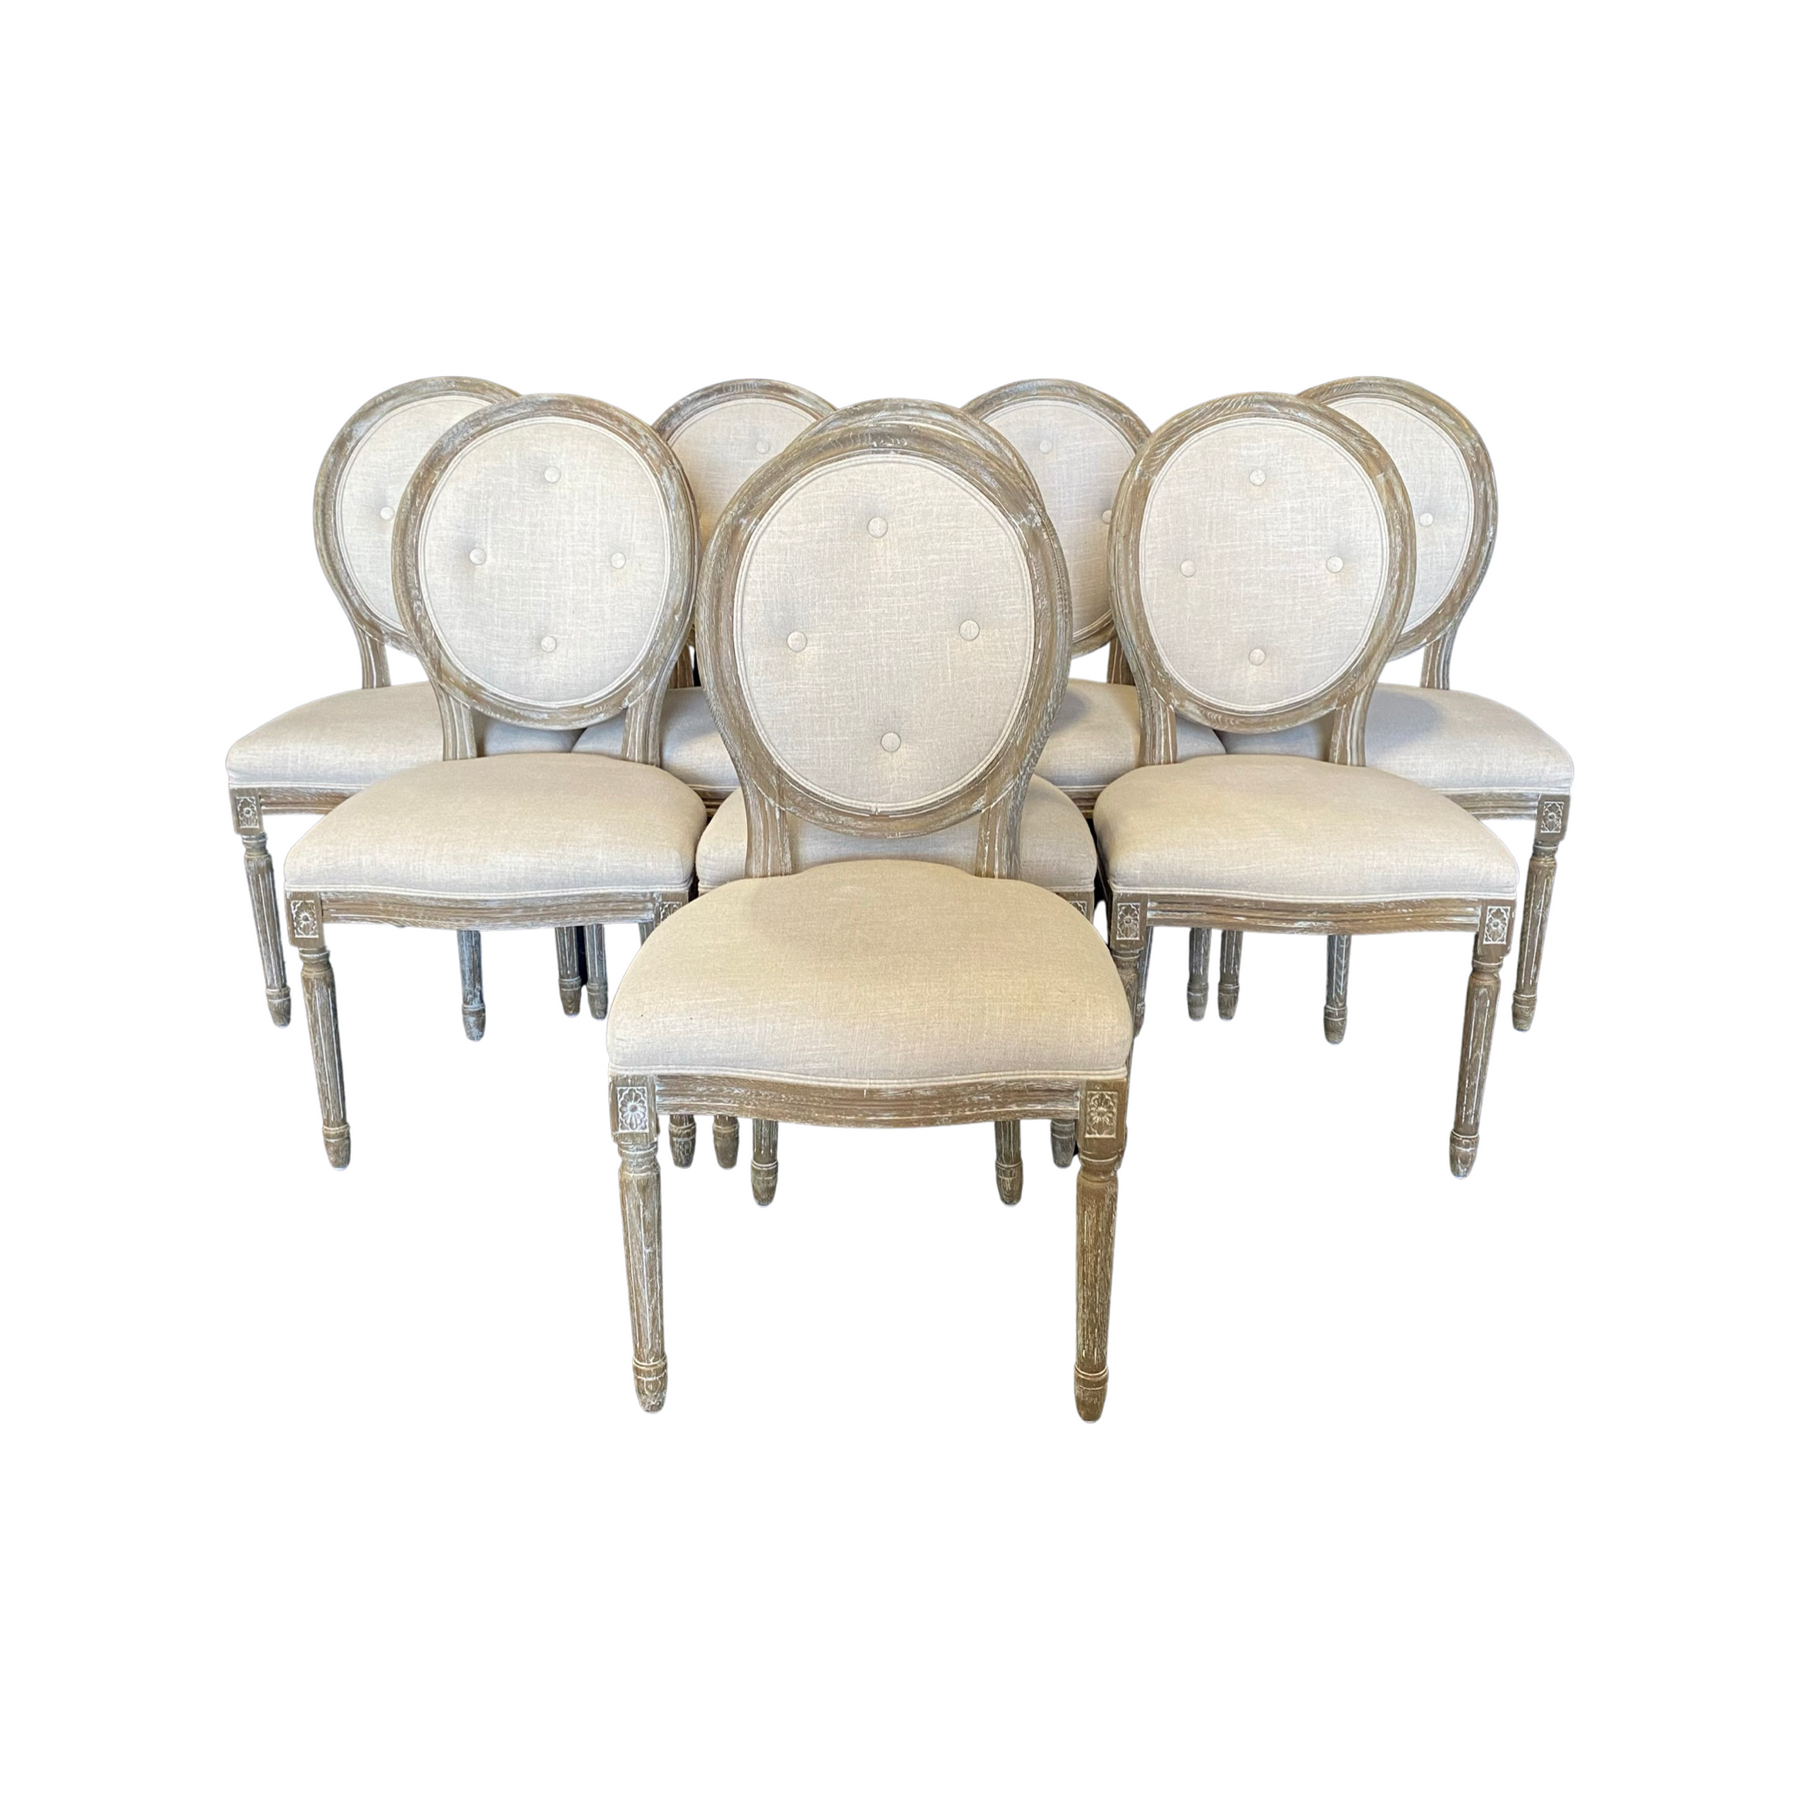 A Set of 8 French Louis XVI-Style Painted Square Back Dining Chairs, c